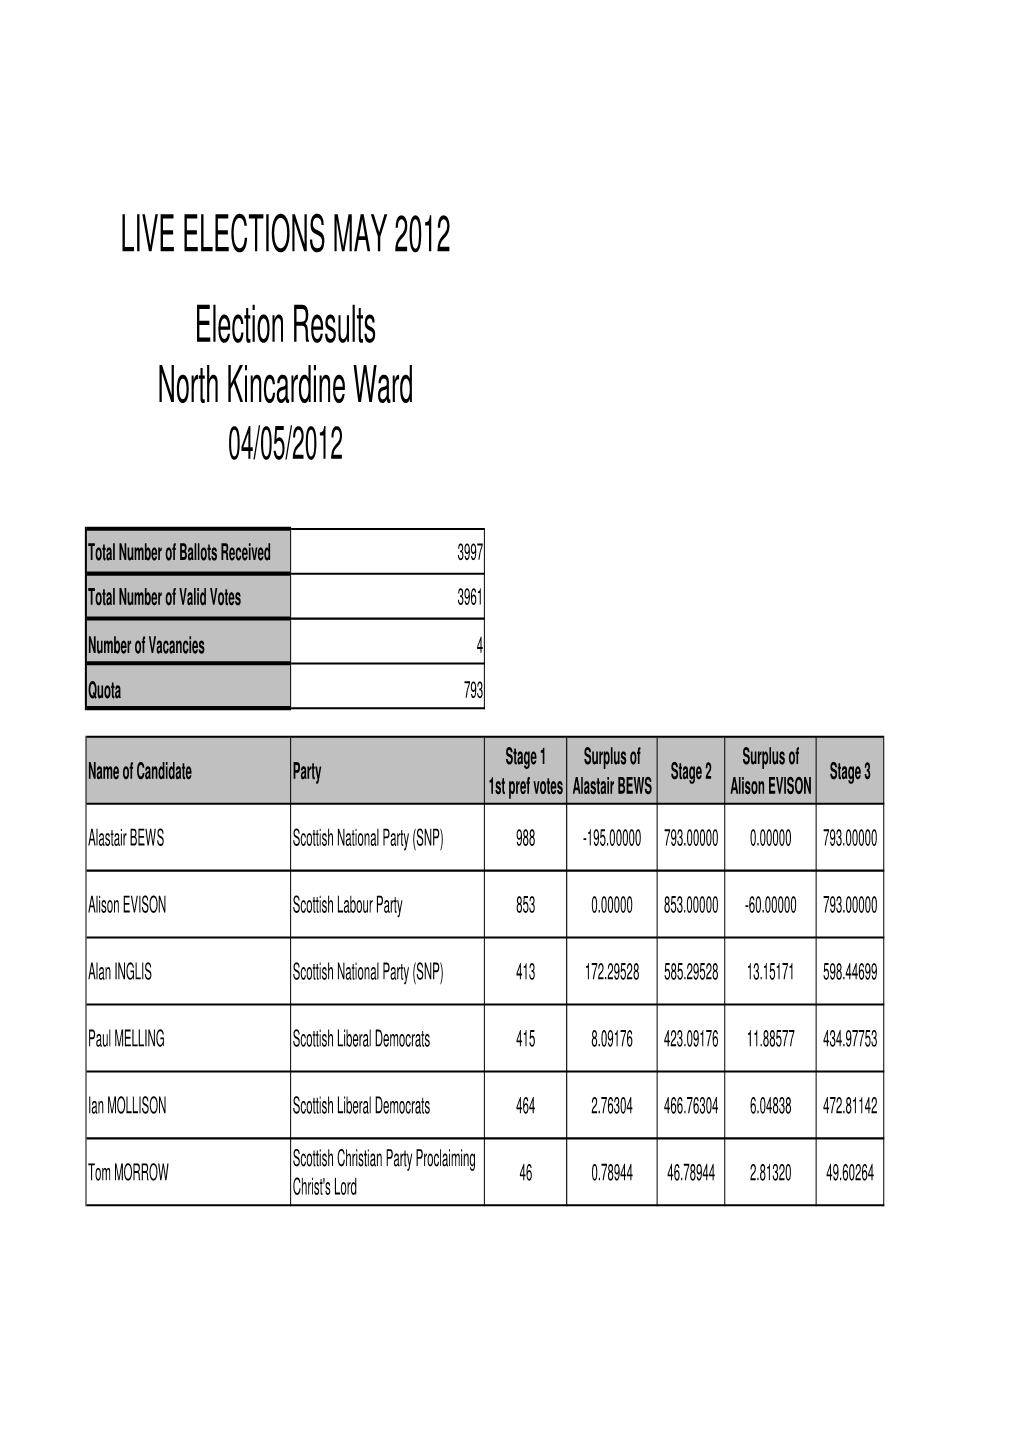 Election Results for Ward 17